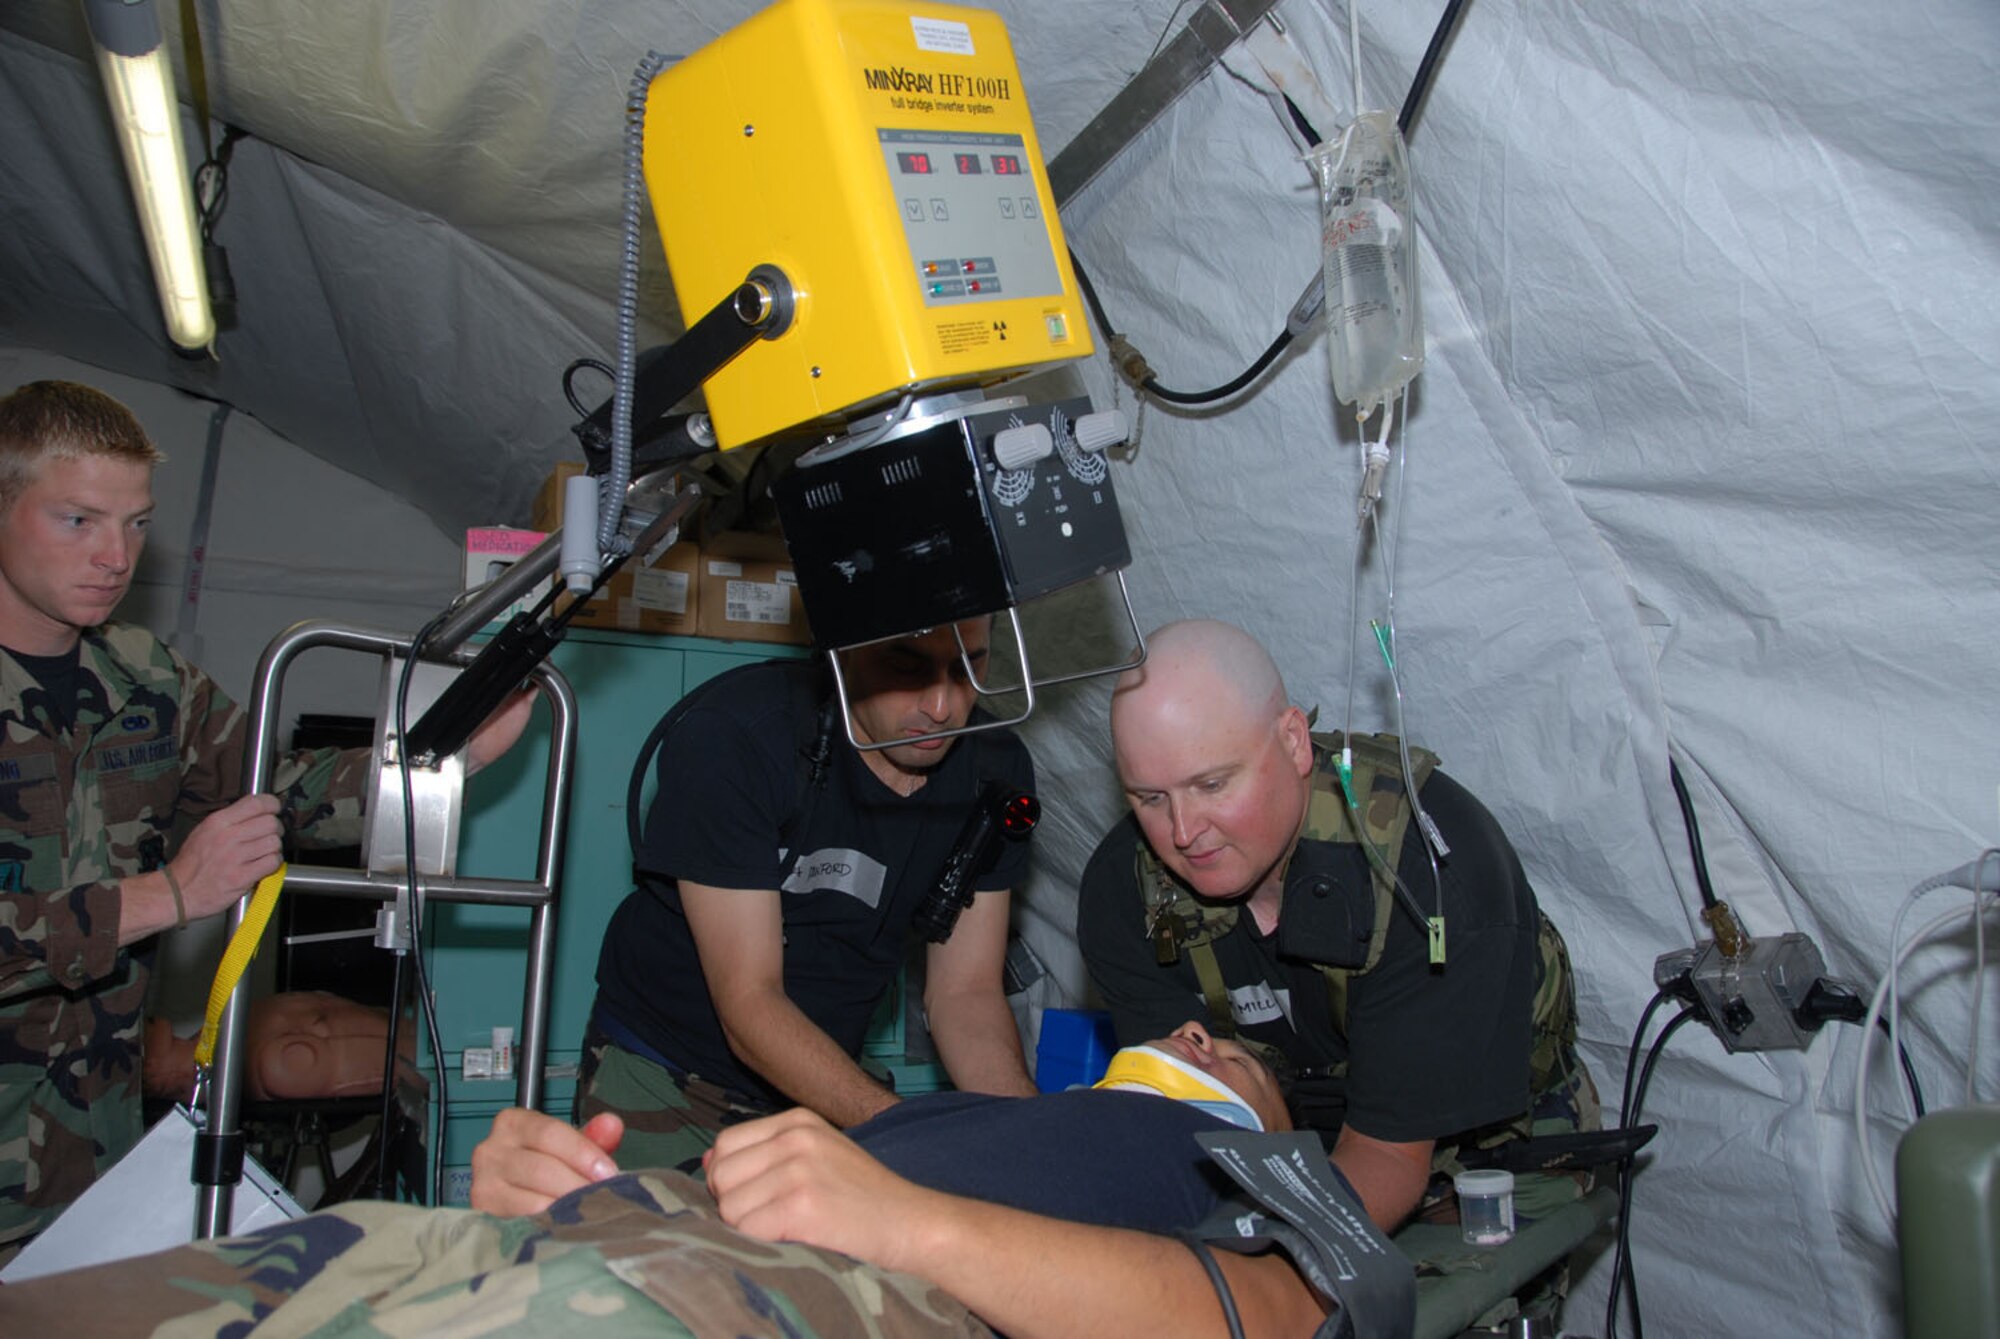 Senior Airman James Young (left), 442nd Medical Squadron, Whiteman Air Force Base, Mo.; Senior Airman Richard Danford (center), 138th Medical Group, Oklahoma Air National Guard; and Tech. Sgt. Christopher E. Miller, 442nd MDS, perform an X-ray during Expeditionary Medical Support System training at Fort McCoy, Wis., as part of Patriot 06. (U.S. Air Force photo/Master Sgt. Chance Babin)